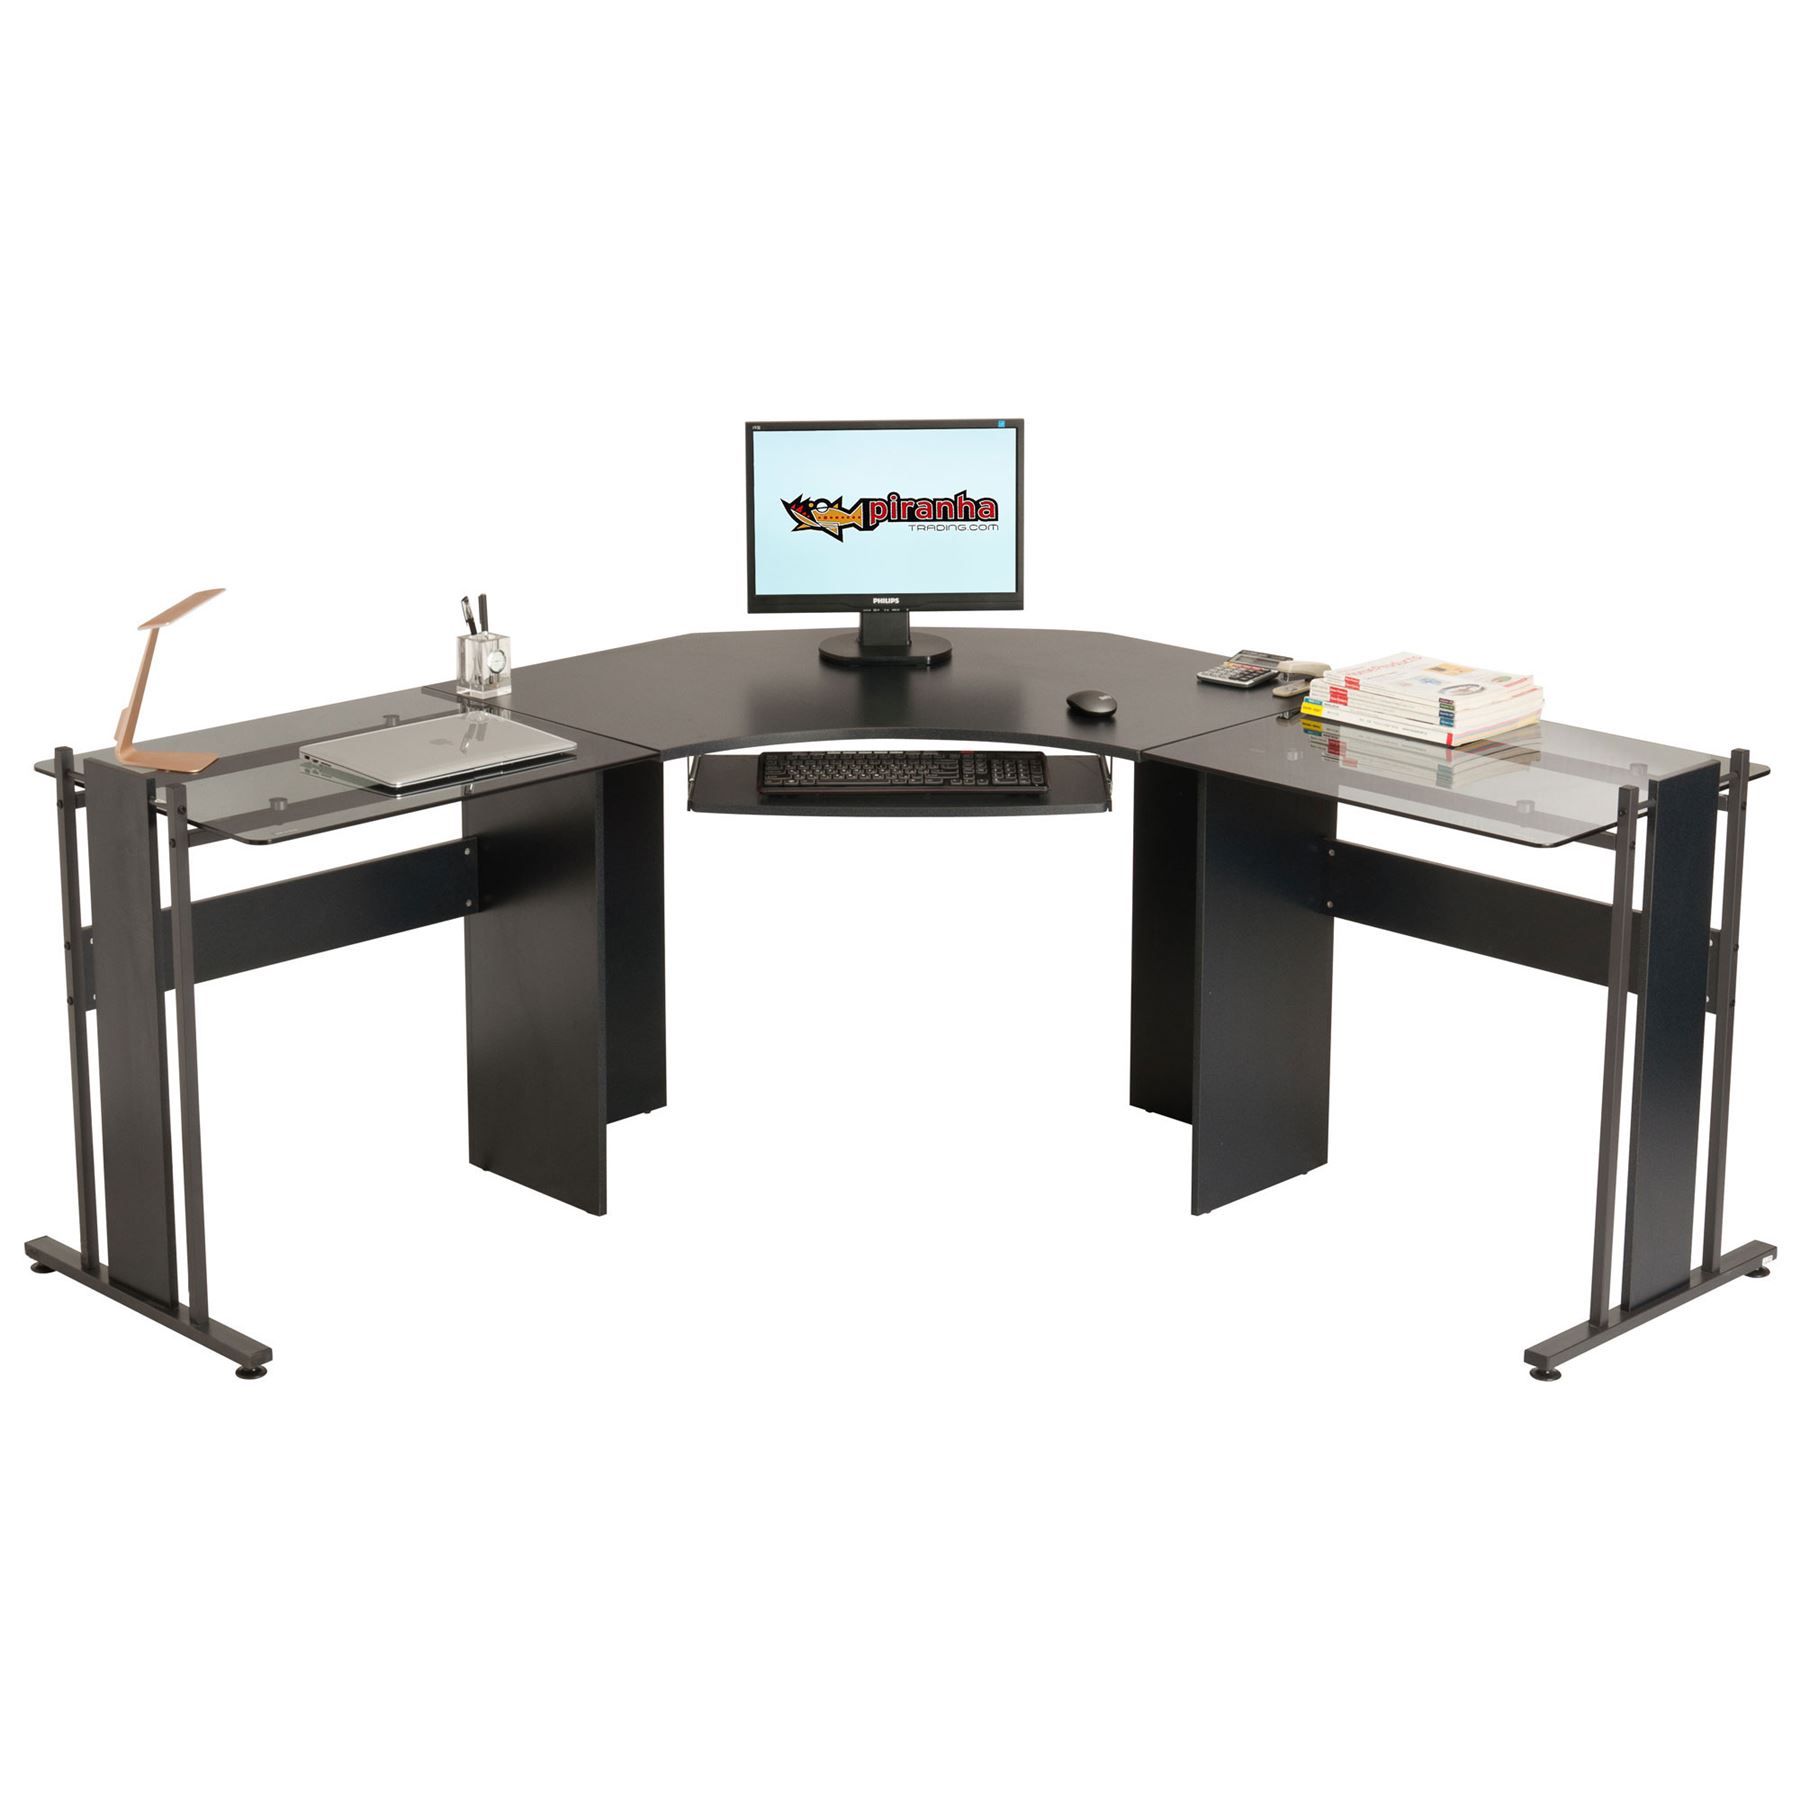 Large Corner Desk Graphite Black Finish For Home Office Piranha Within Graphite Convertible Desks With Keyboard Shelf (View 2 of 15)